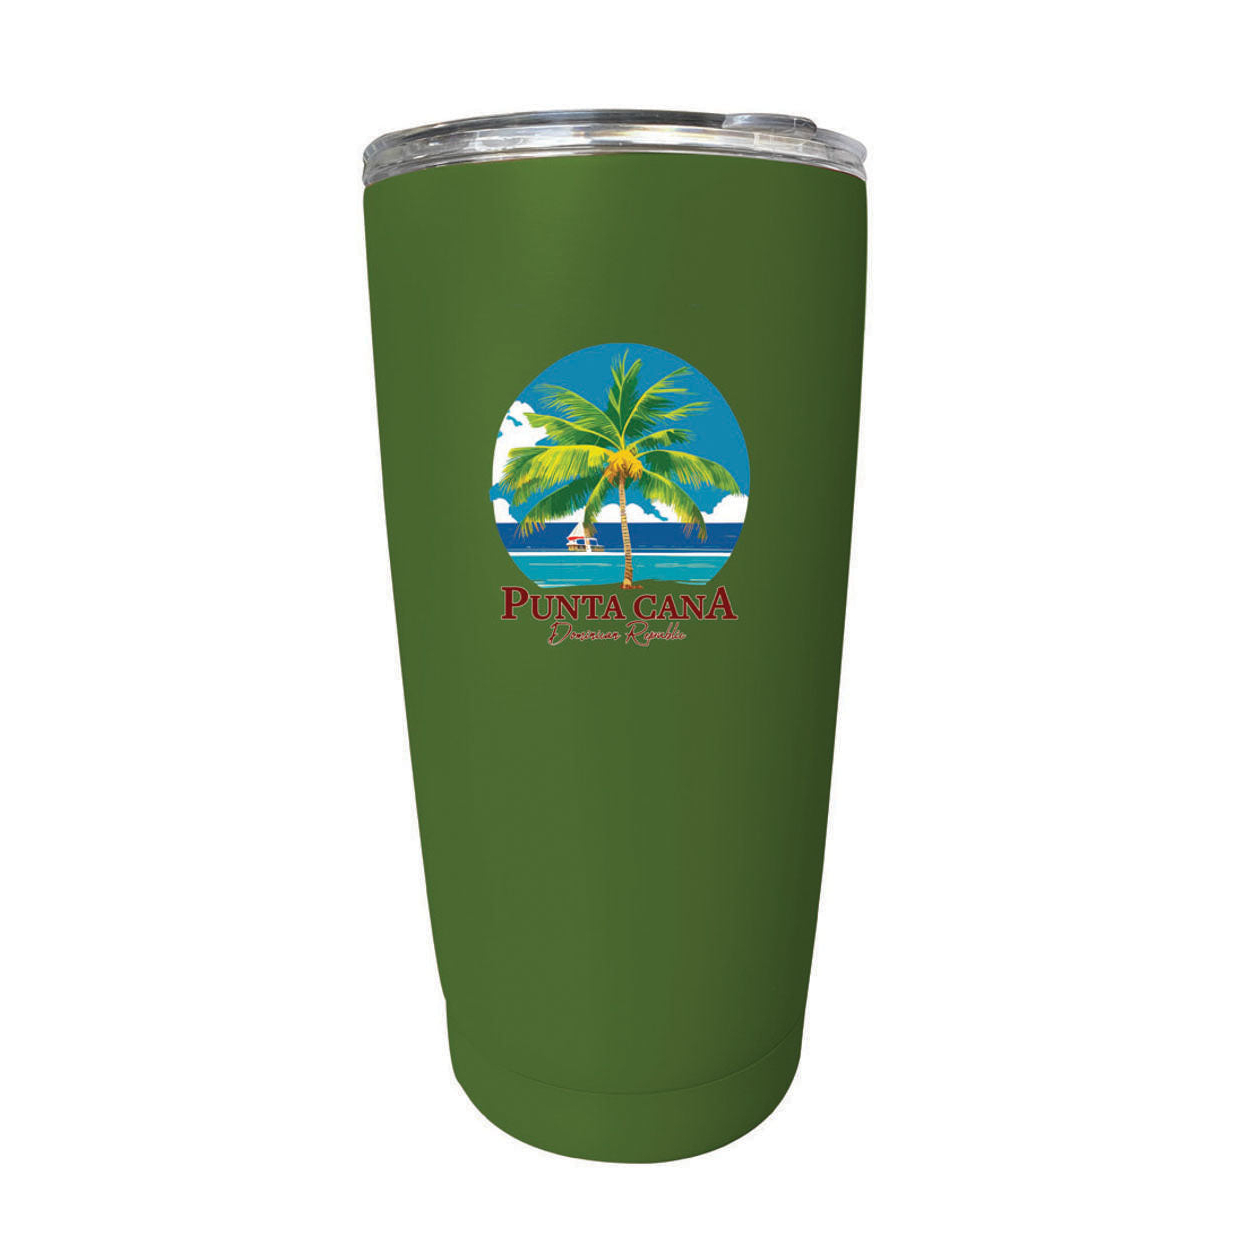 Punta Cana Dominican Republic Souvenir 16 Oz Stainless Steel Insulated Tumbler - Red, PALM